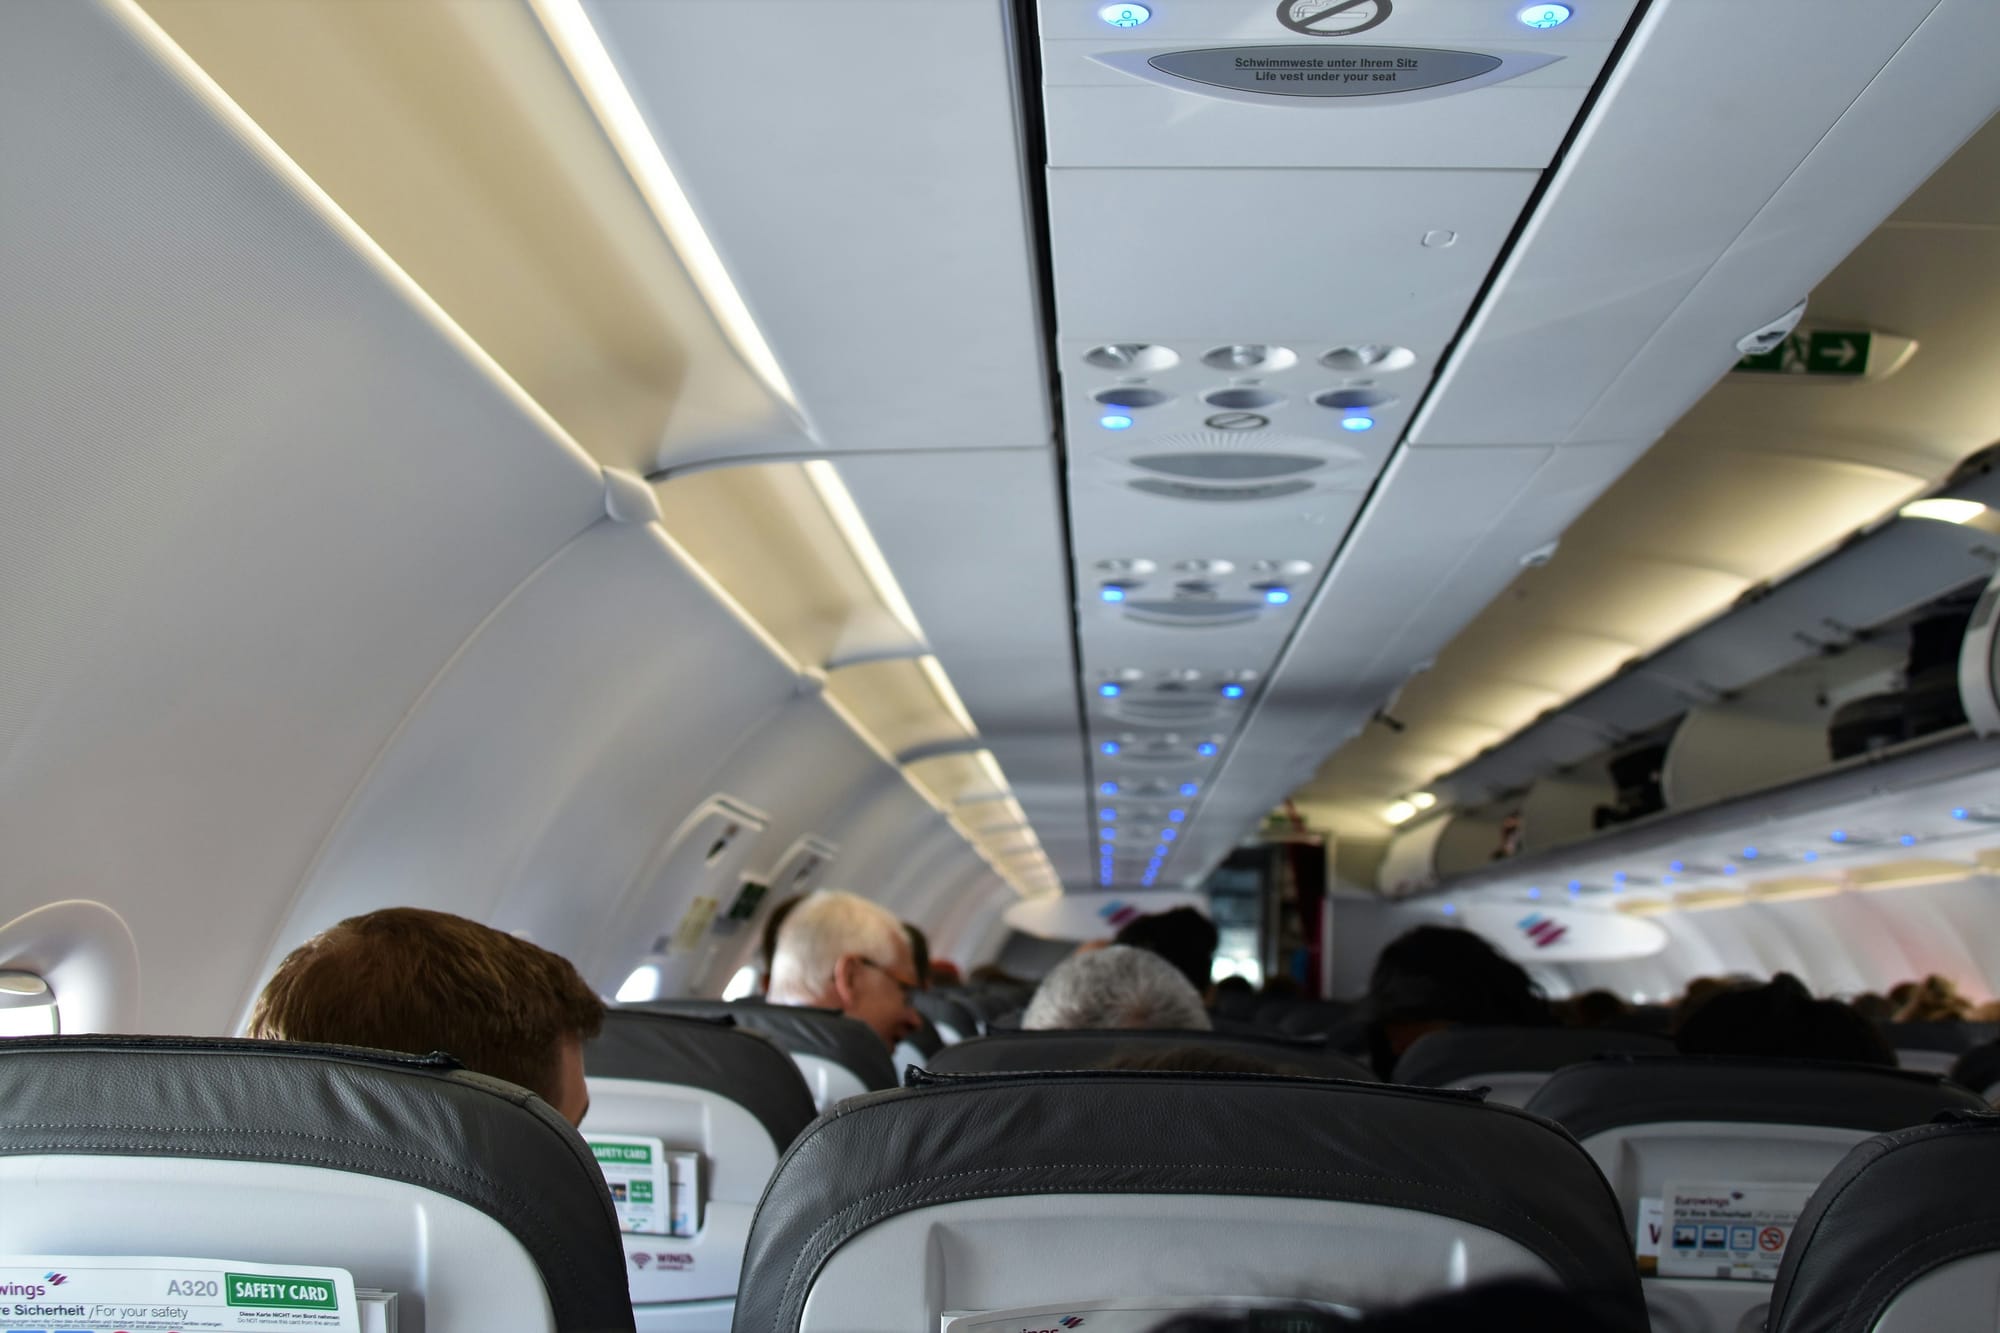 Stuck in Economy When You Paid for First Class? Here's What to Do About an Involuntary Downgrade